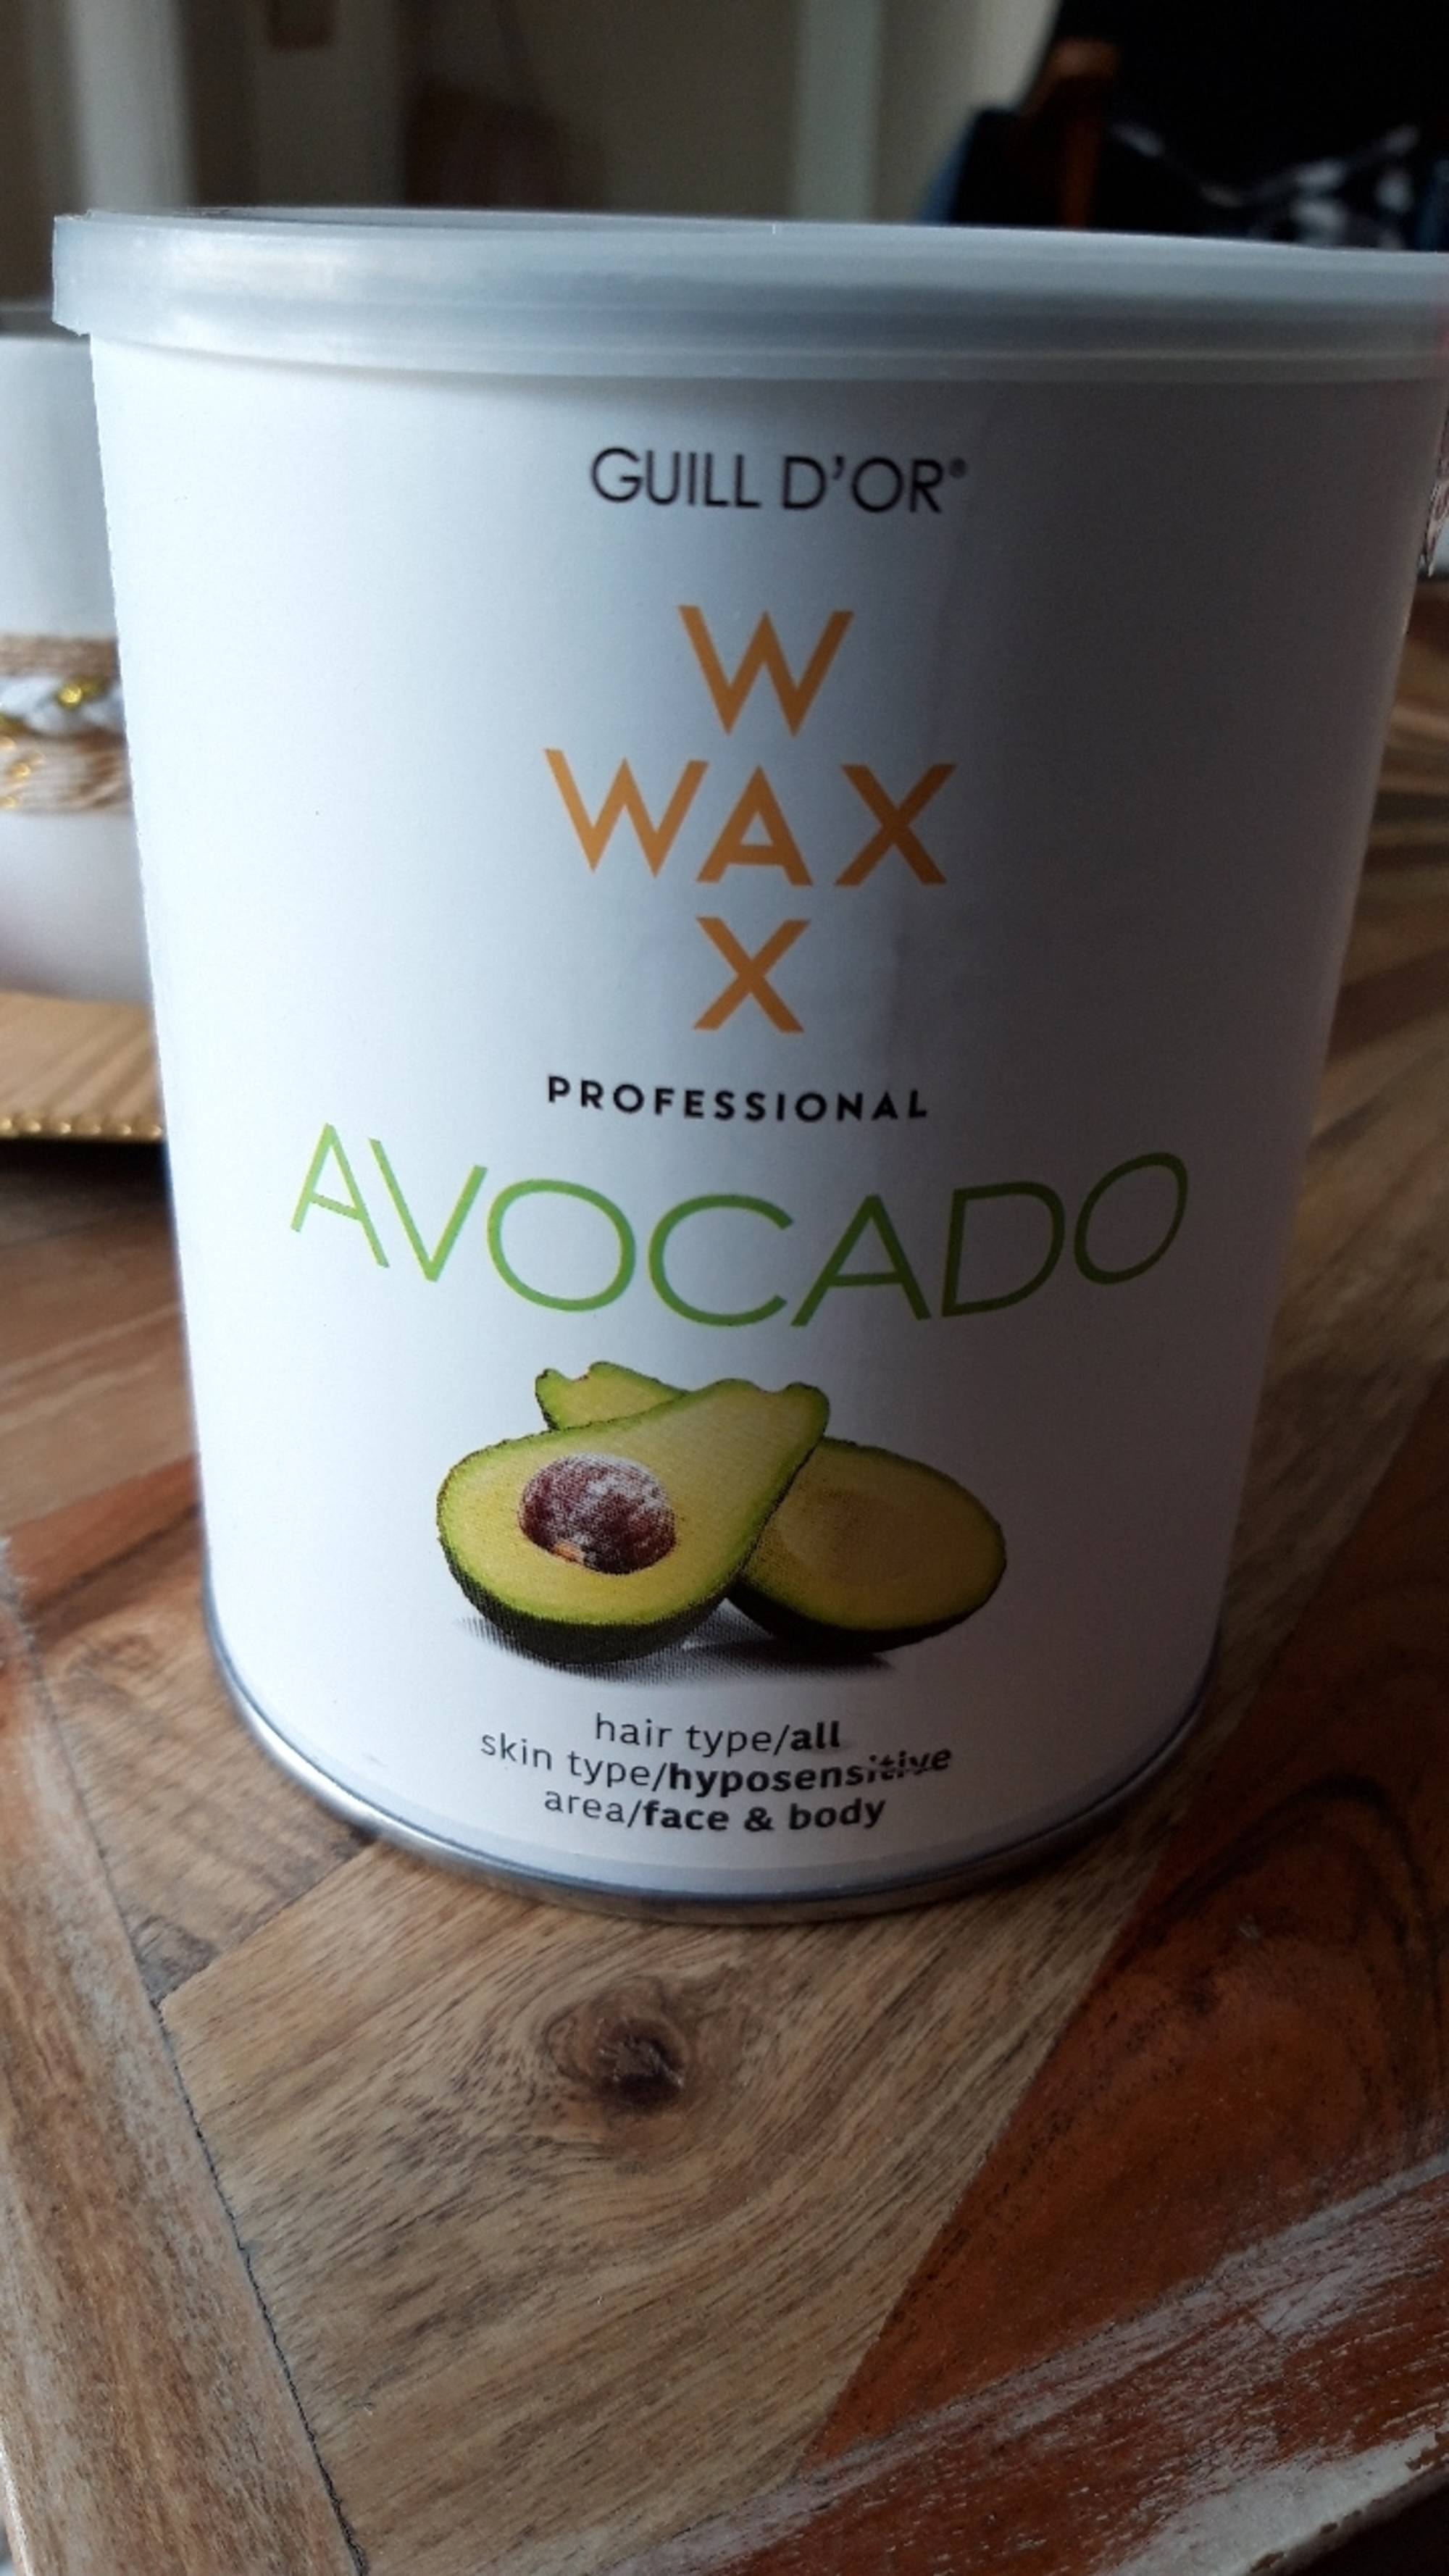 GUILL D'OR - Avocado - Wax professional